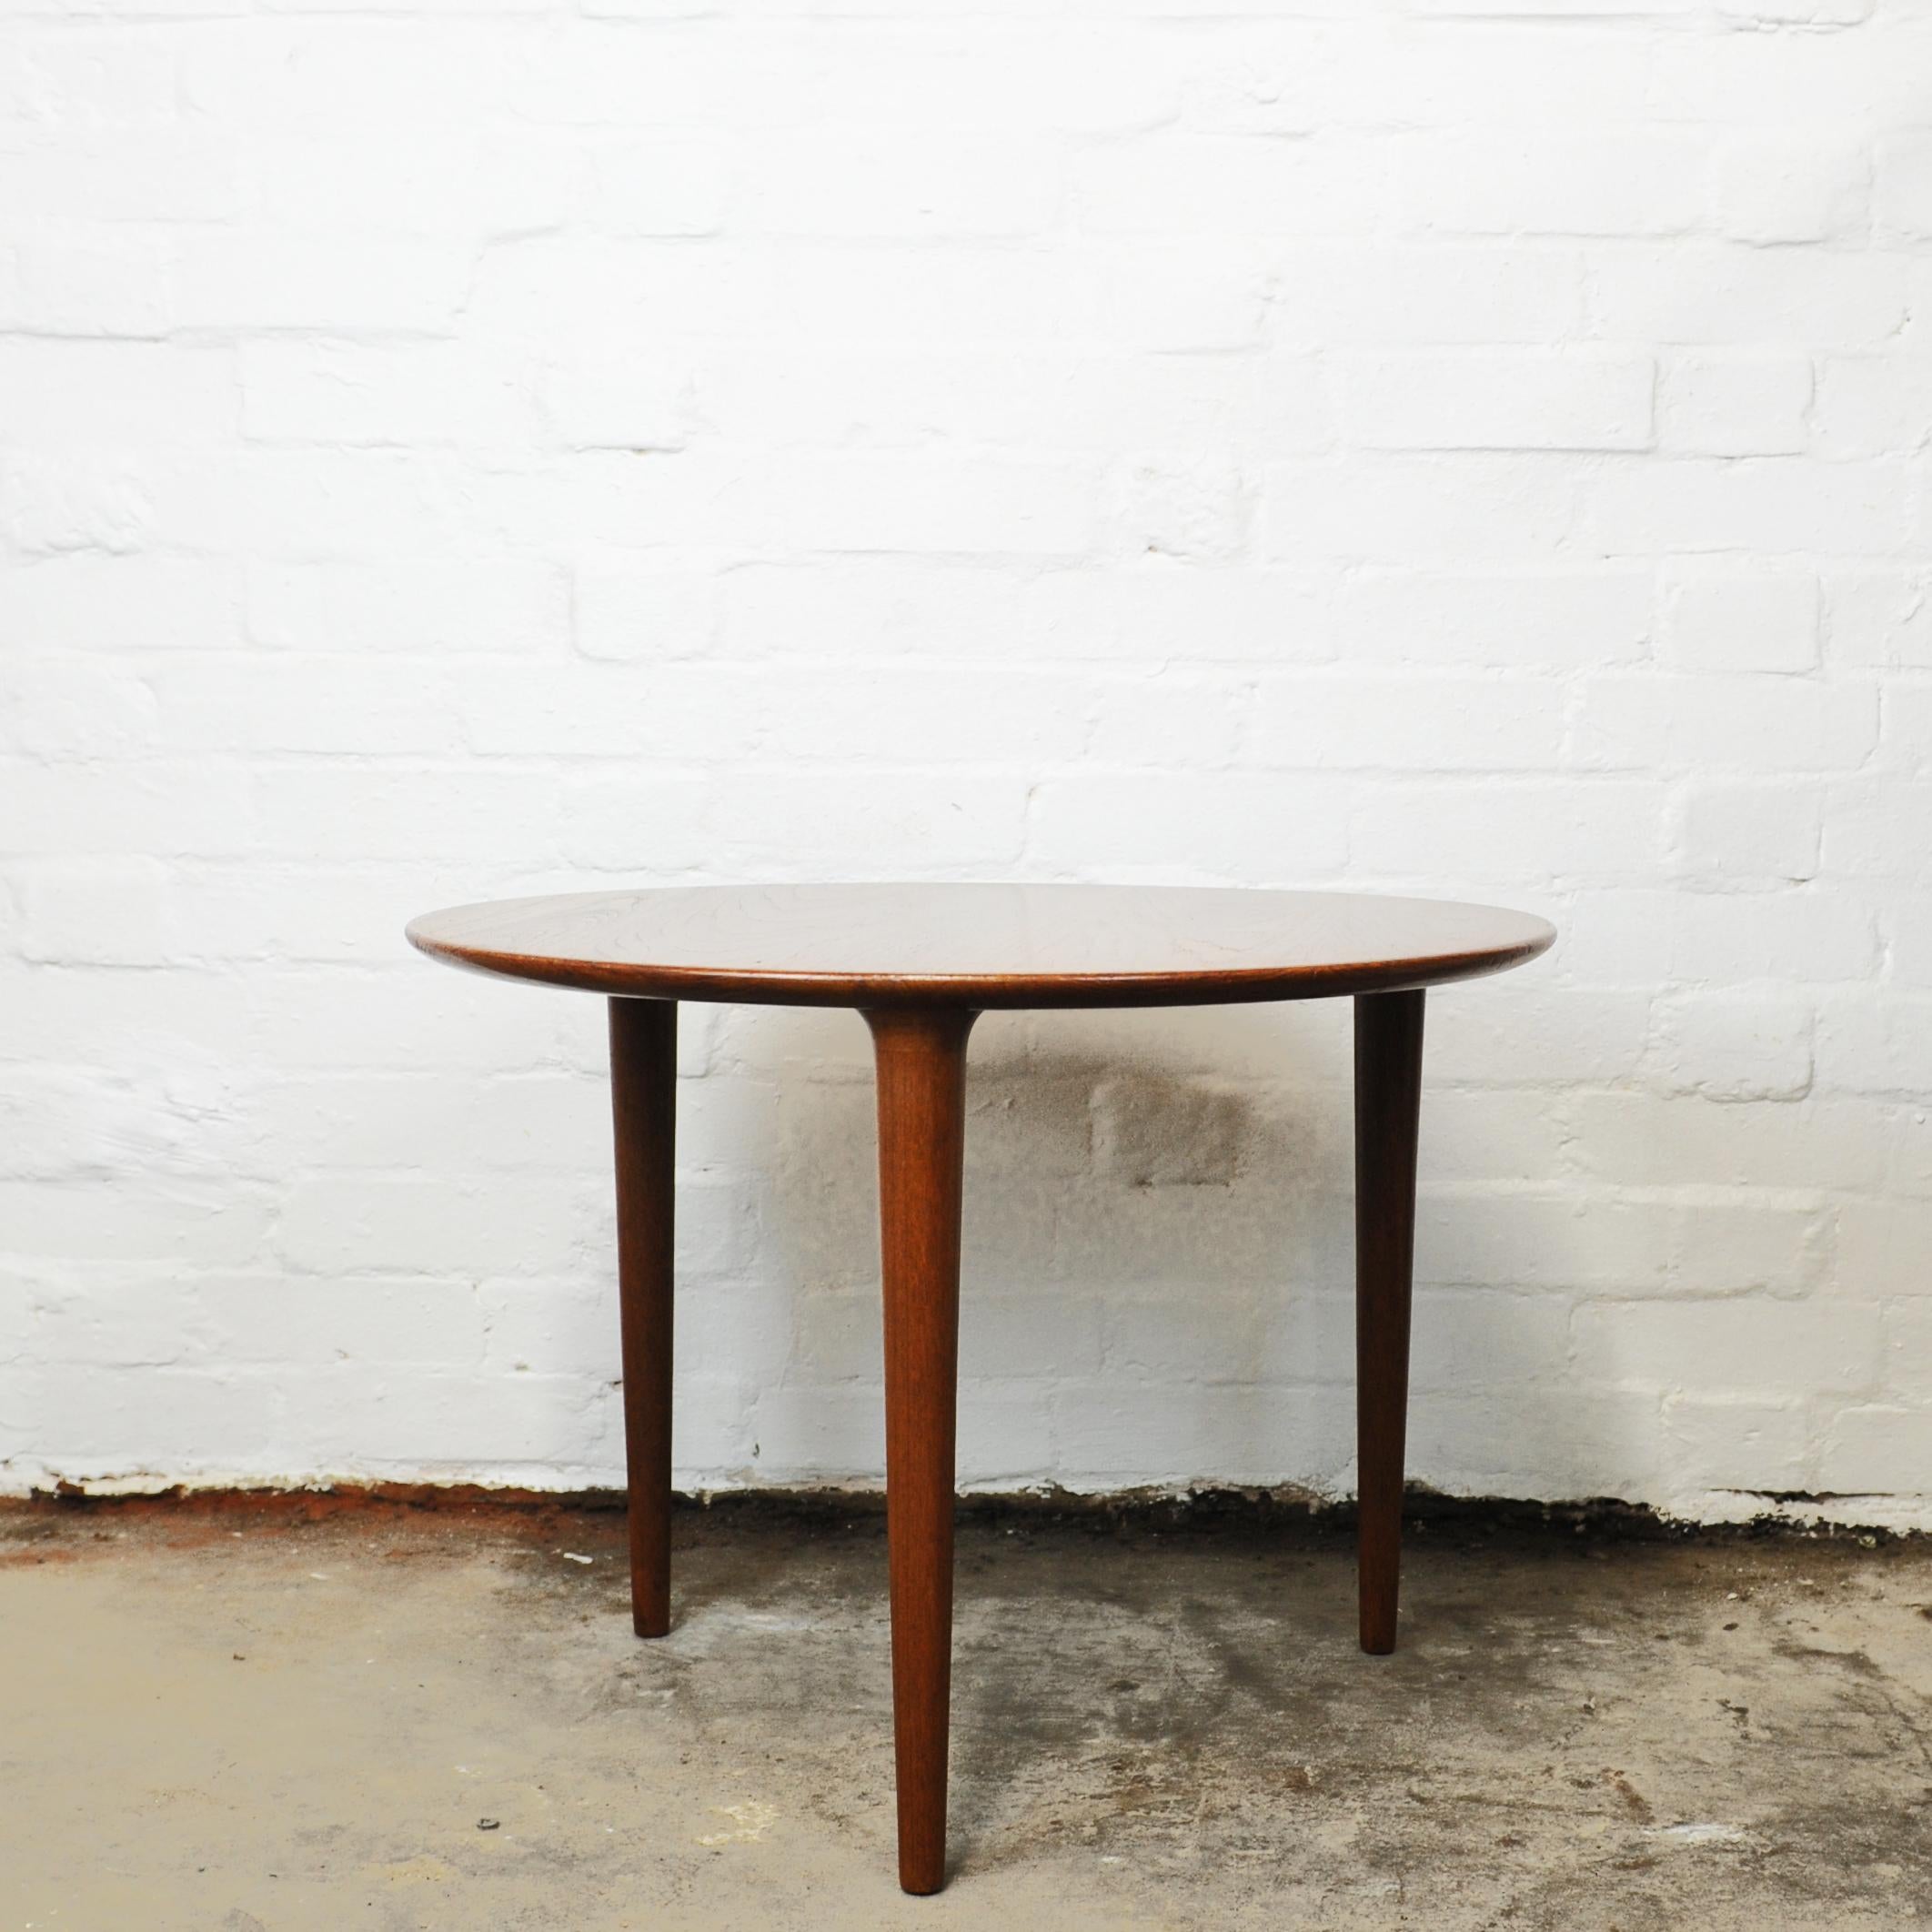 Round Teak Three Legged Coffee Table by Norsk Design Ltd, 1960s For Sale 1